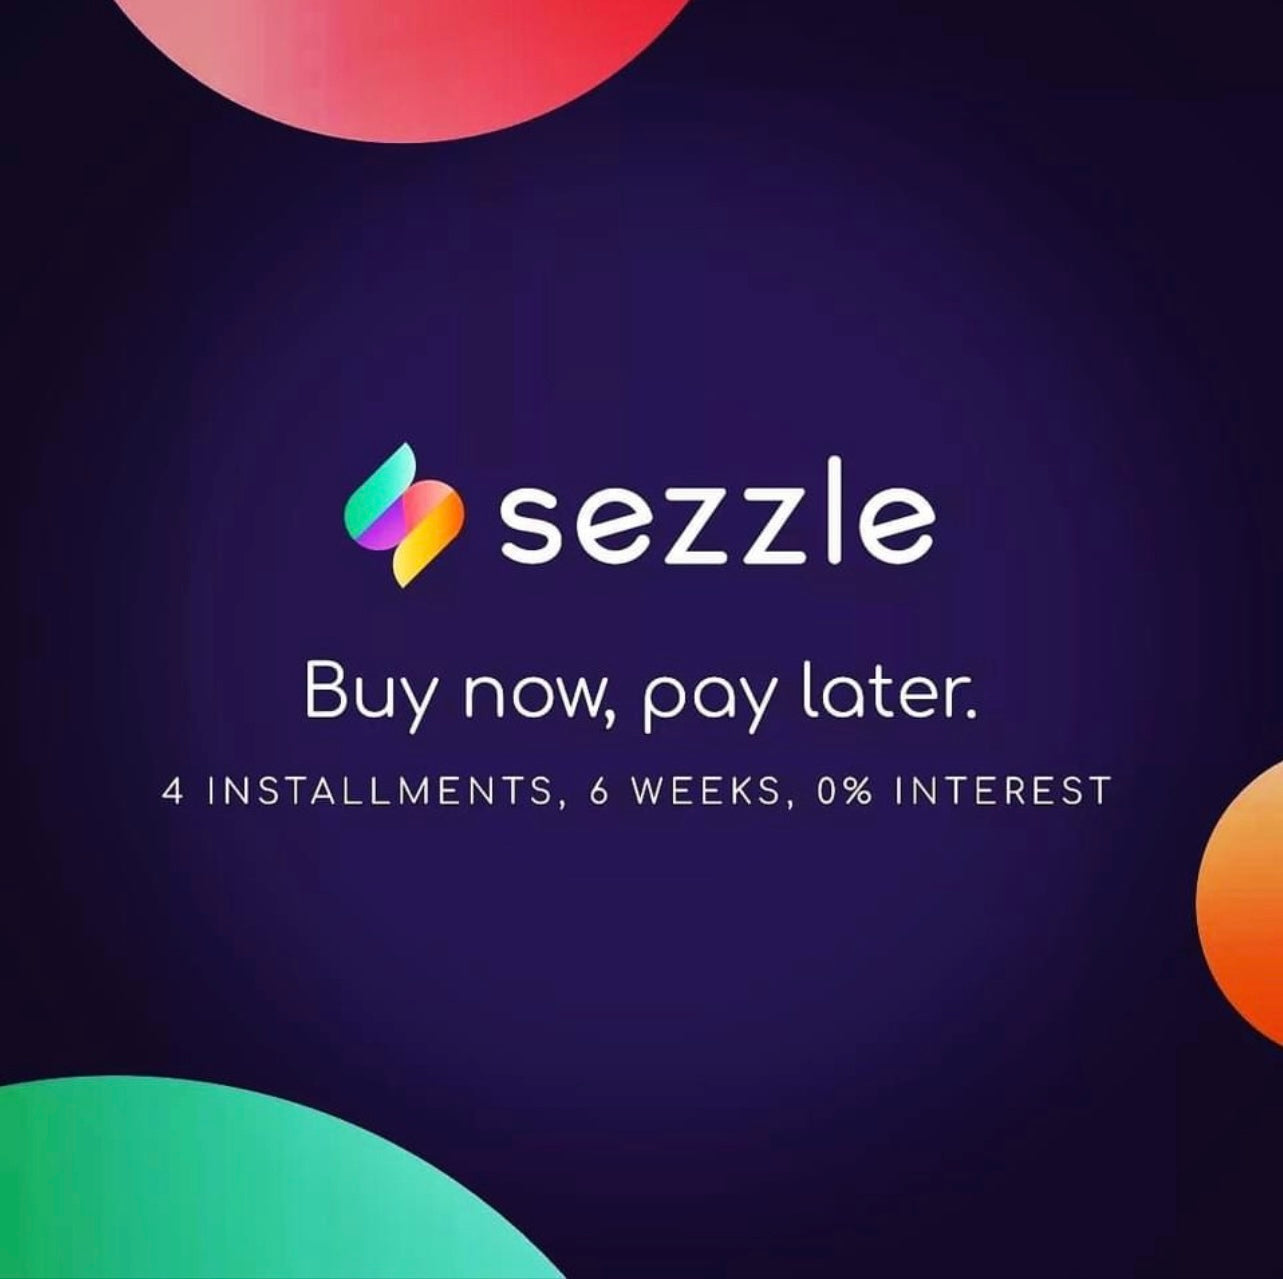 Why wait? Buy now and pay later Available for Canada Just select Sezzle at the checkout